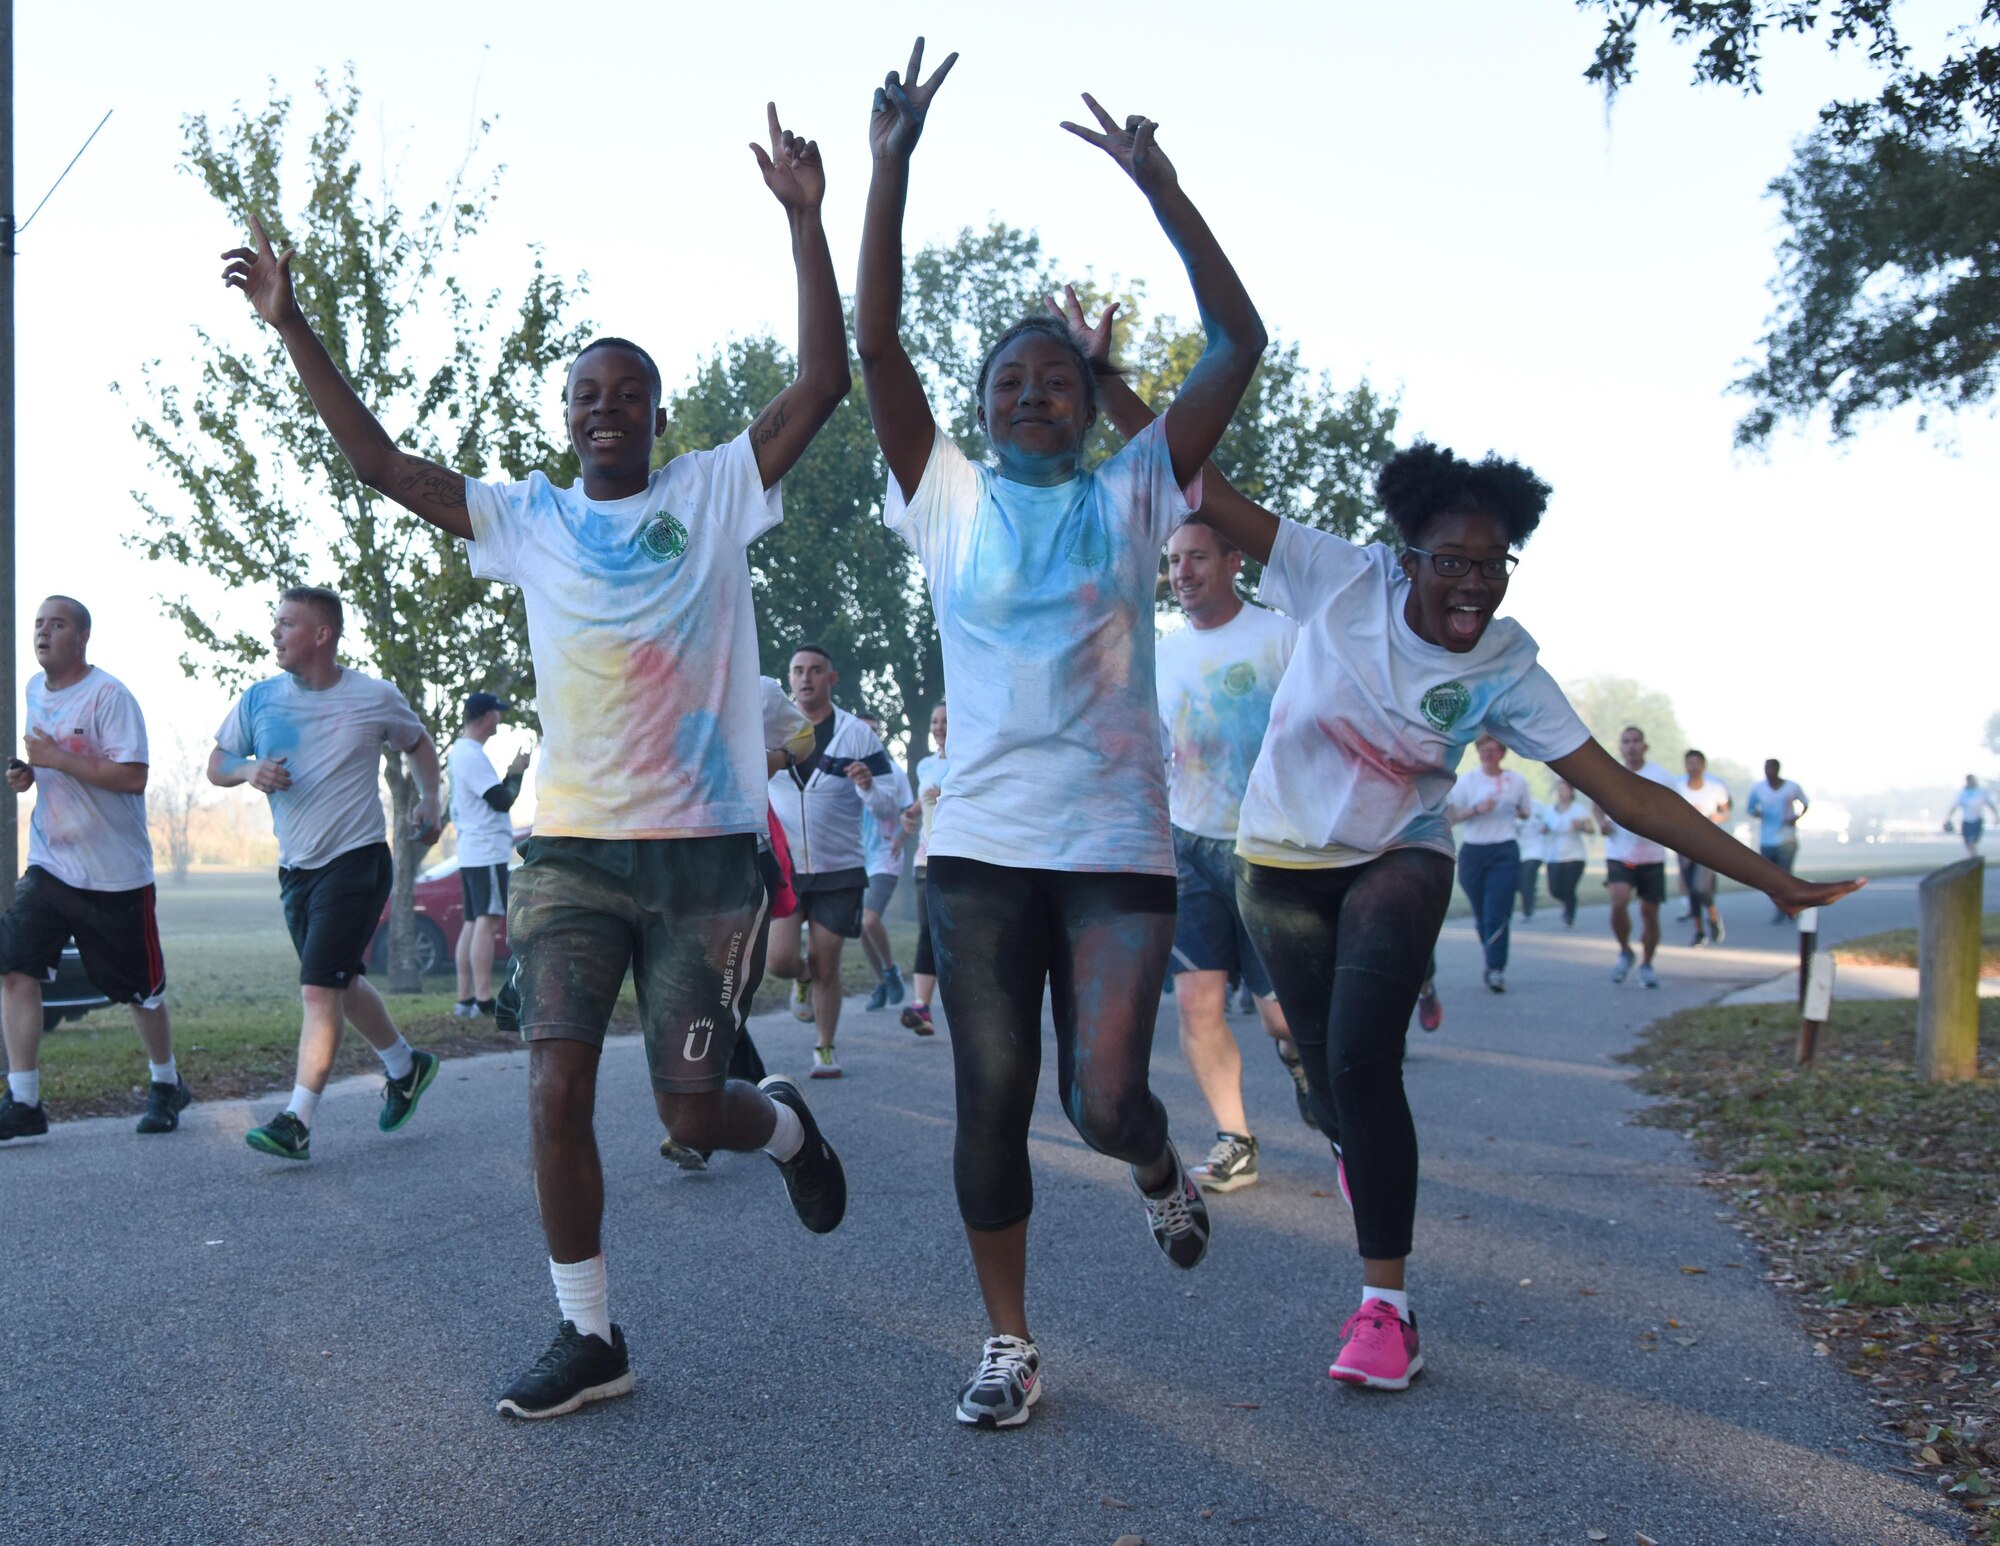 Keesler personnel participate in an 81st Training Wing color run at the Marina Park Nov. 17, 2016, on Keesler Air Force Base, Miss. The run was one of several events held throughout Dragon Week, which focuses on resiliency and teambuilding initiatives across the base. (U.S. Air Force photo by Kemberly Groue/Released)